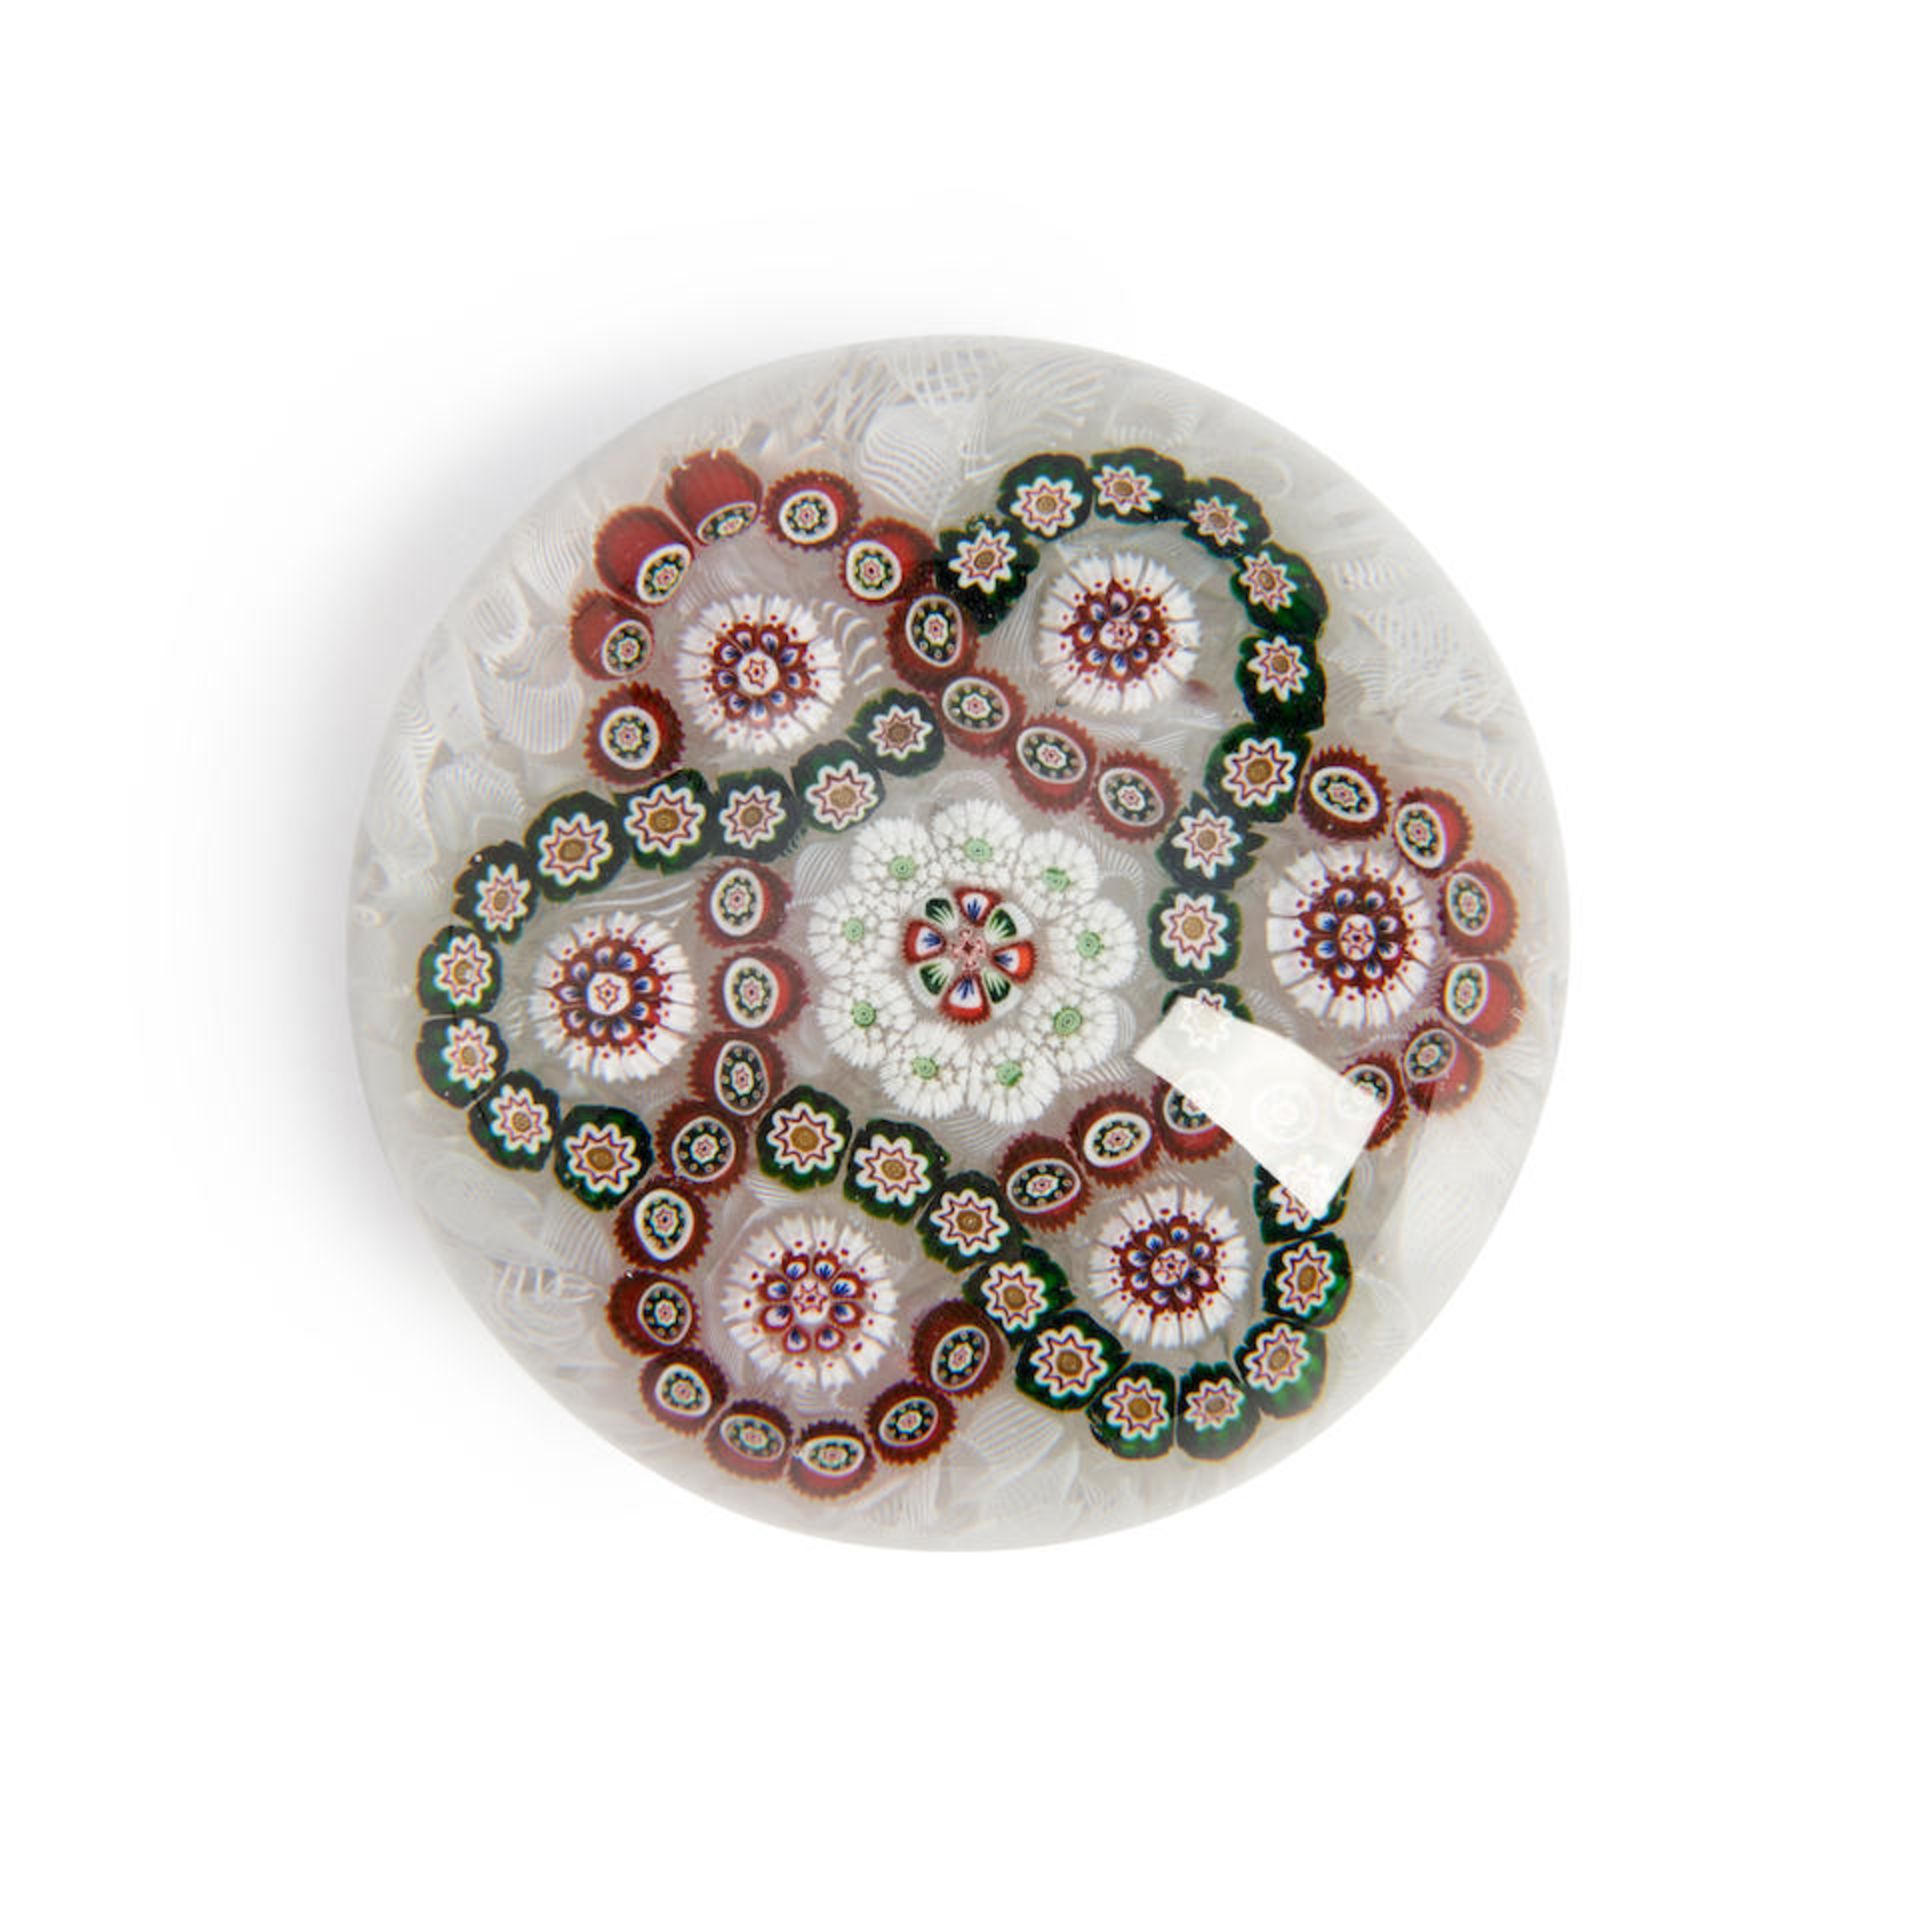 BACCARAT GARLANDED CIRCLETS MILLEFIORI GLASS PAPERWEIGHT, France, ht. 2 1/2, dia. 2 3/4 in.